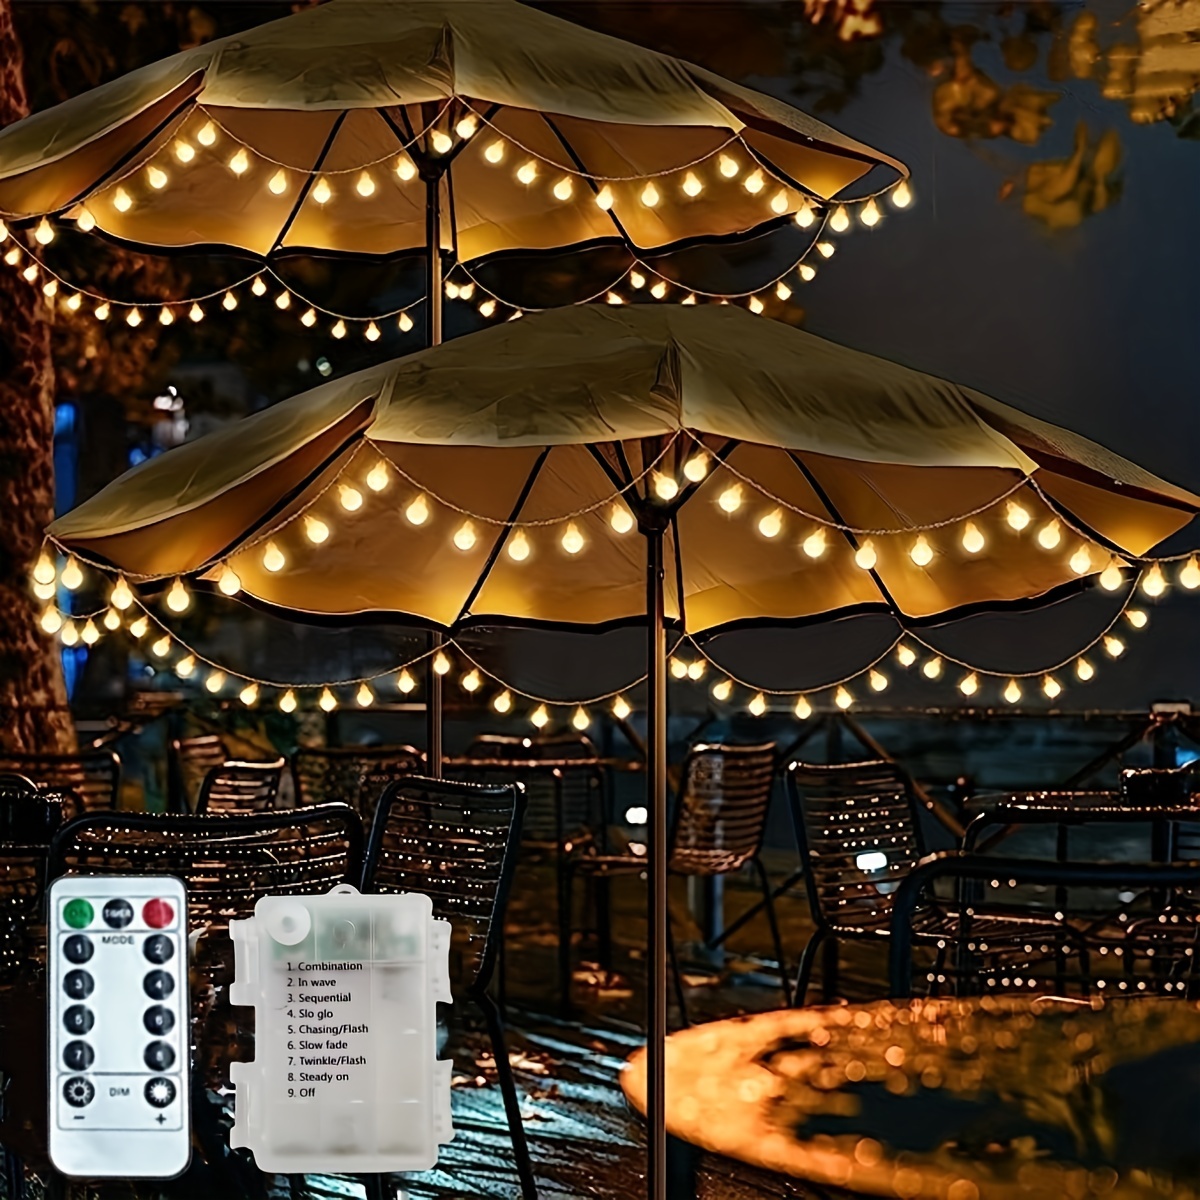 

28ft 56 Led Patio Umbrella String Lights With Remote, Battery-powered, 8 Lighting Modes, Dimmable Timer, Waterproof Outdoor Parasol Light For Garden, Wedding, Party Decoration